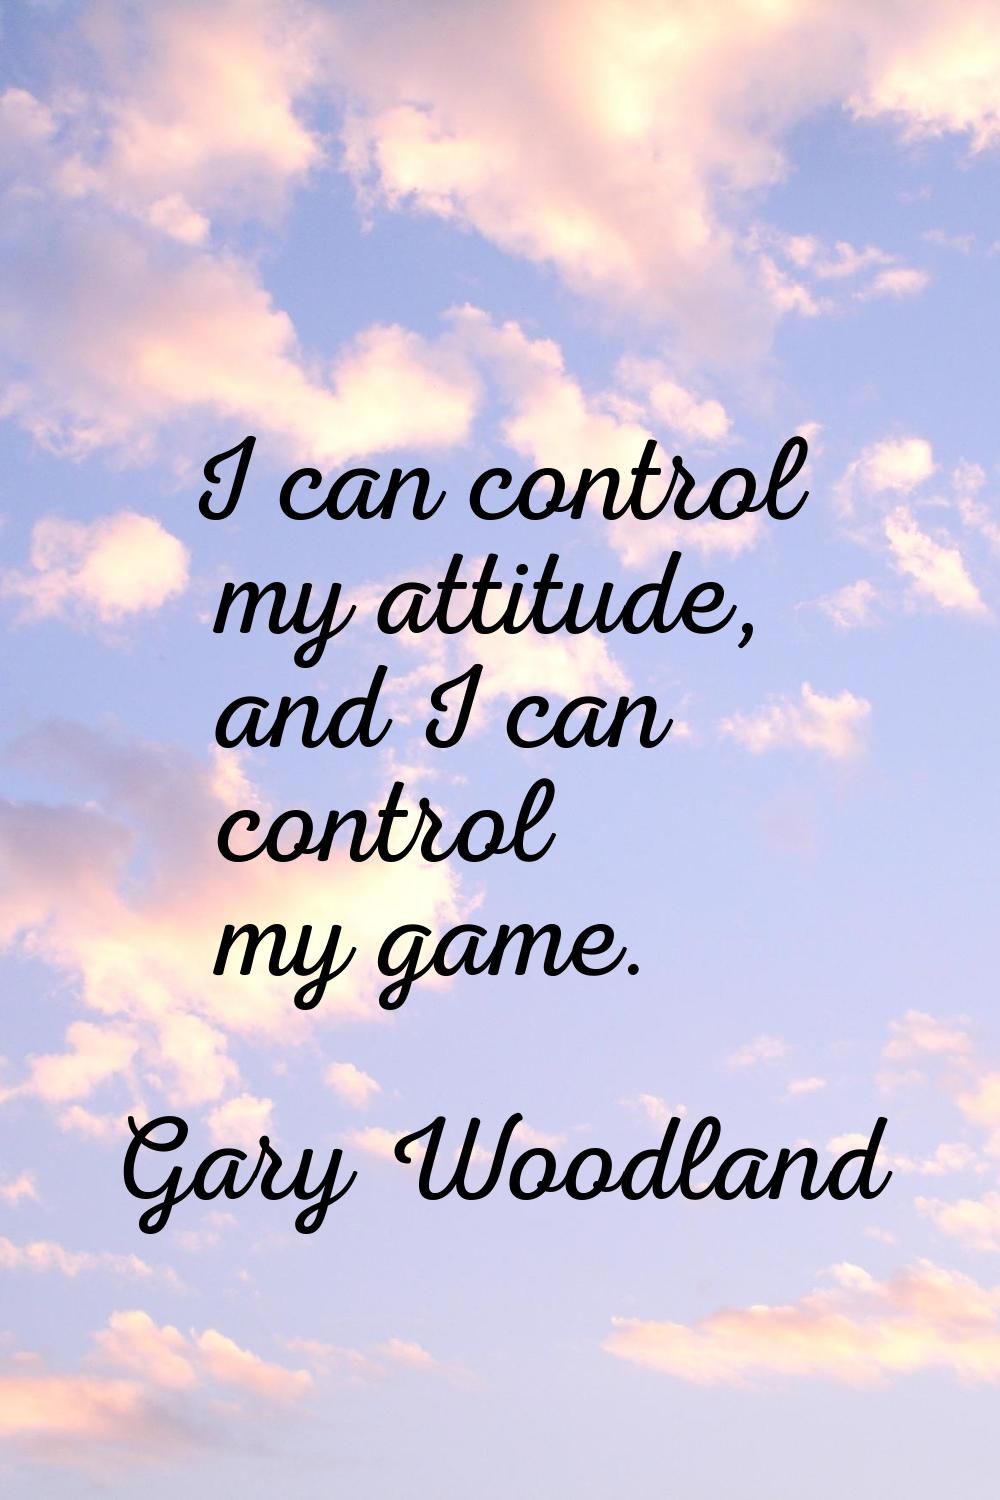 I can control my attitude, and I can control my game.